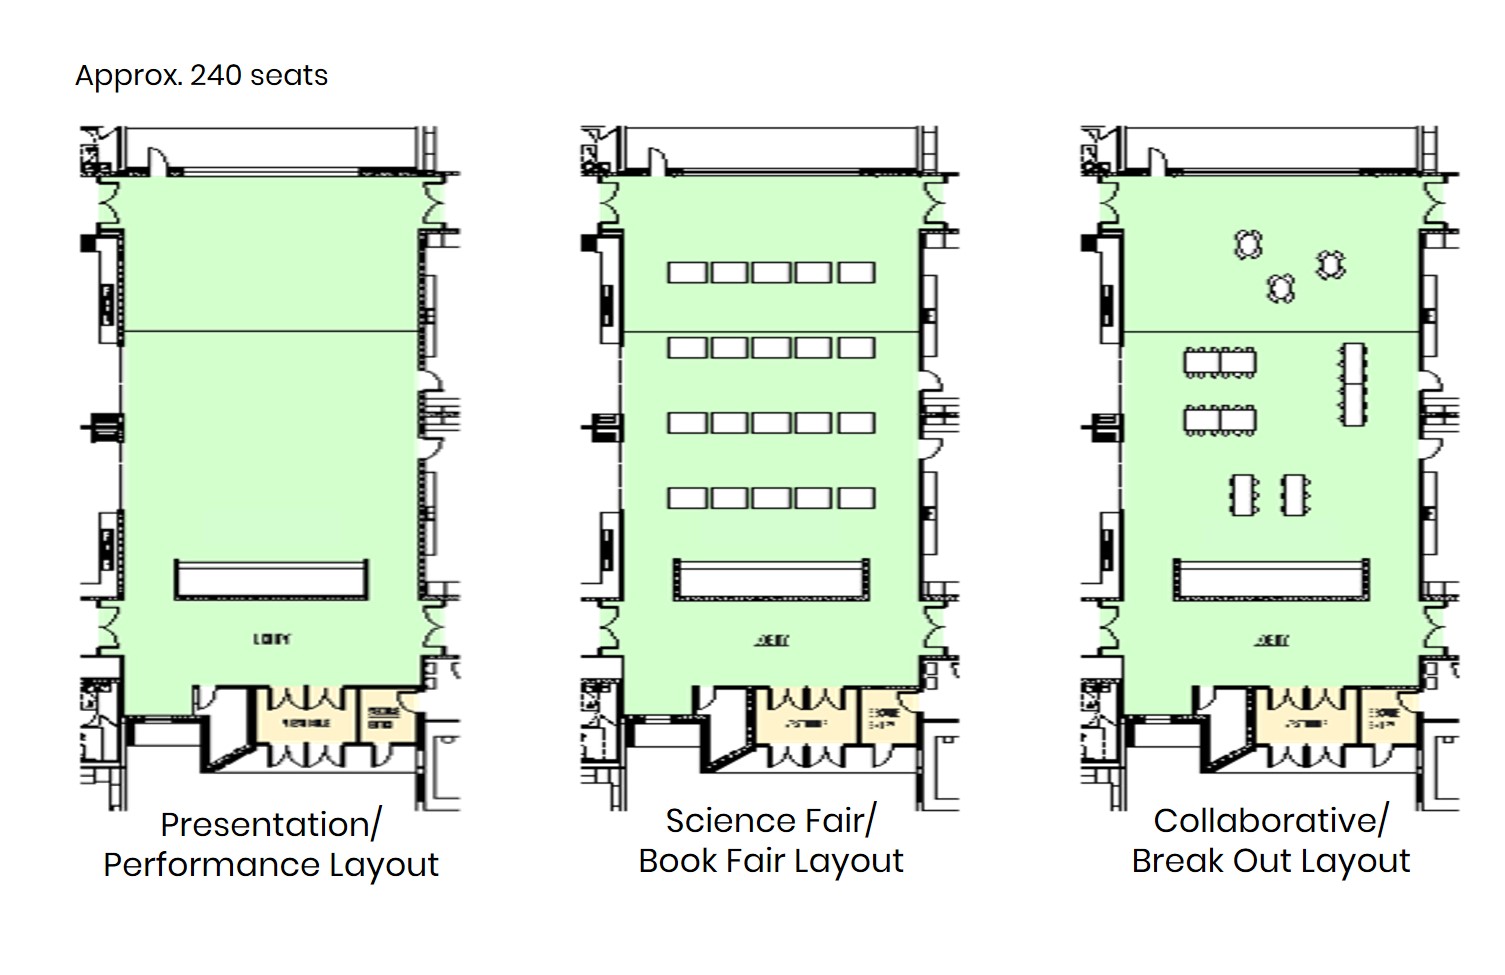 Woodland: Layout options for various uses of the collaborative commons area.